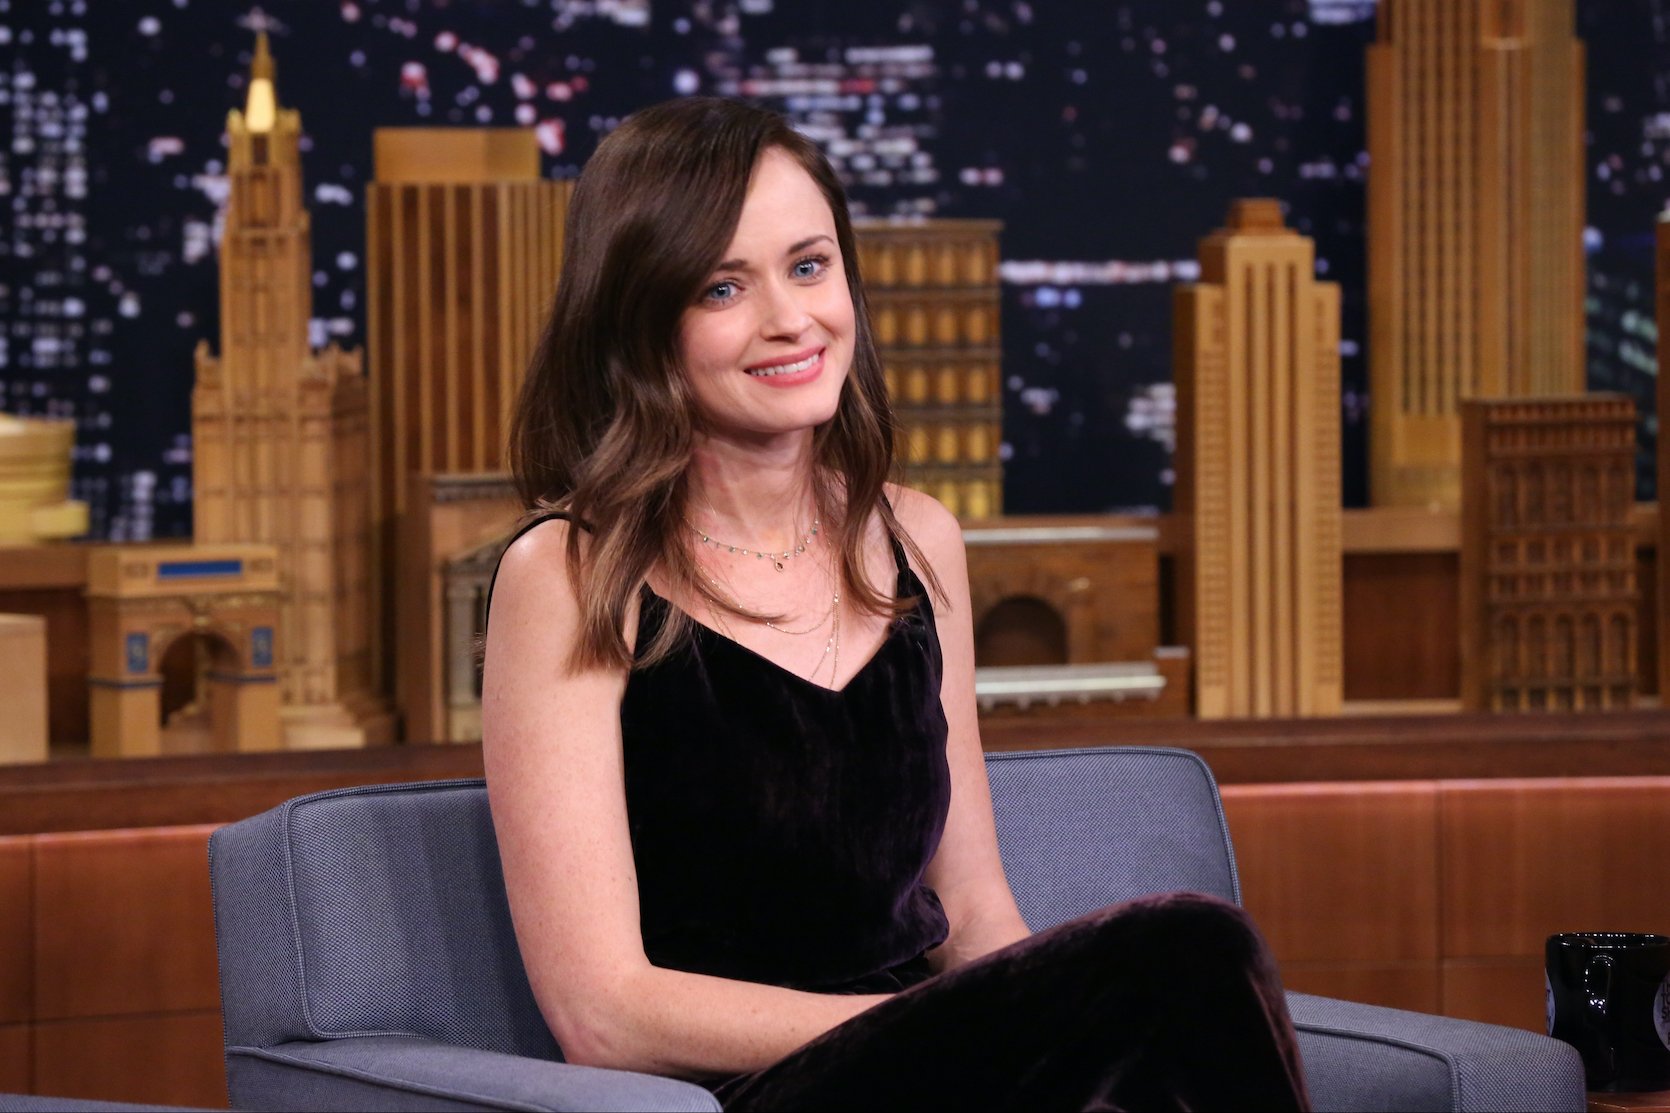 Alexis Bledel on 'The Tonight Show Starring Jimmy Fallon'